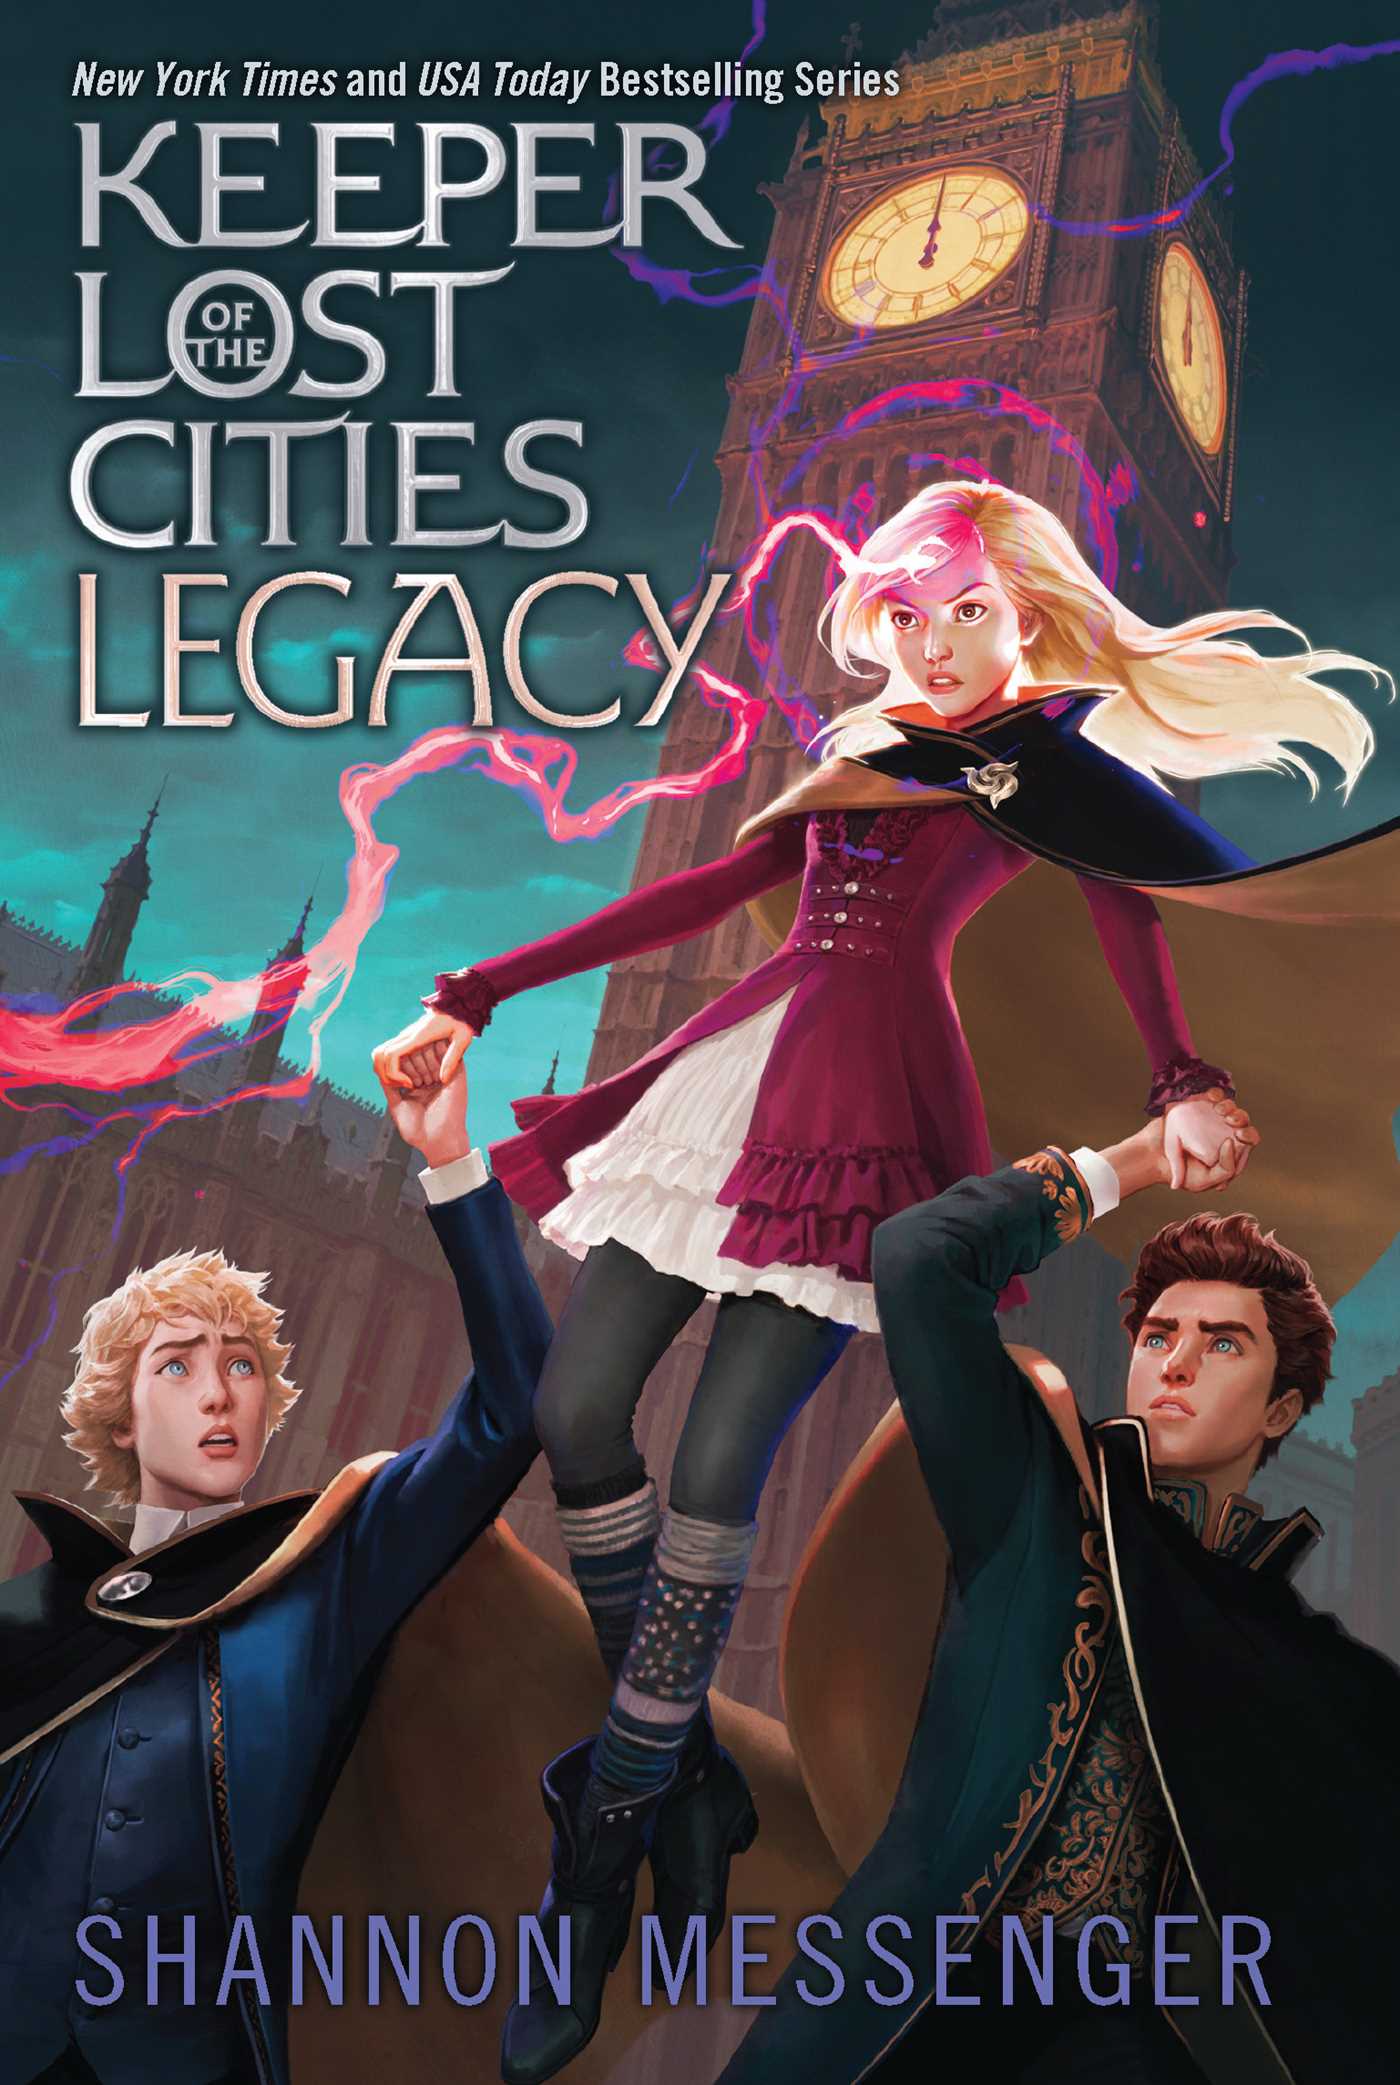 Keeper of the Lost Cities Vol.8 - Legacy | Messenger, Shannon (Auteur)